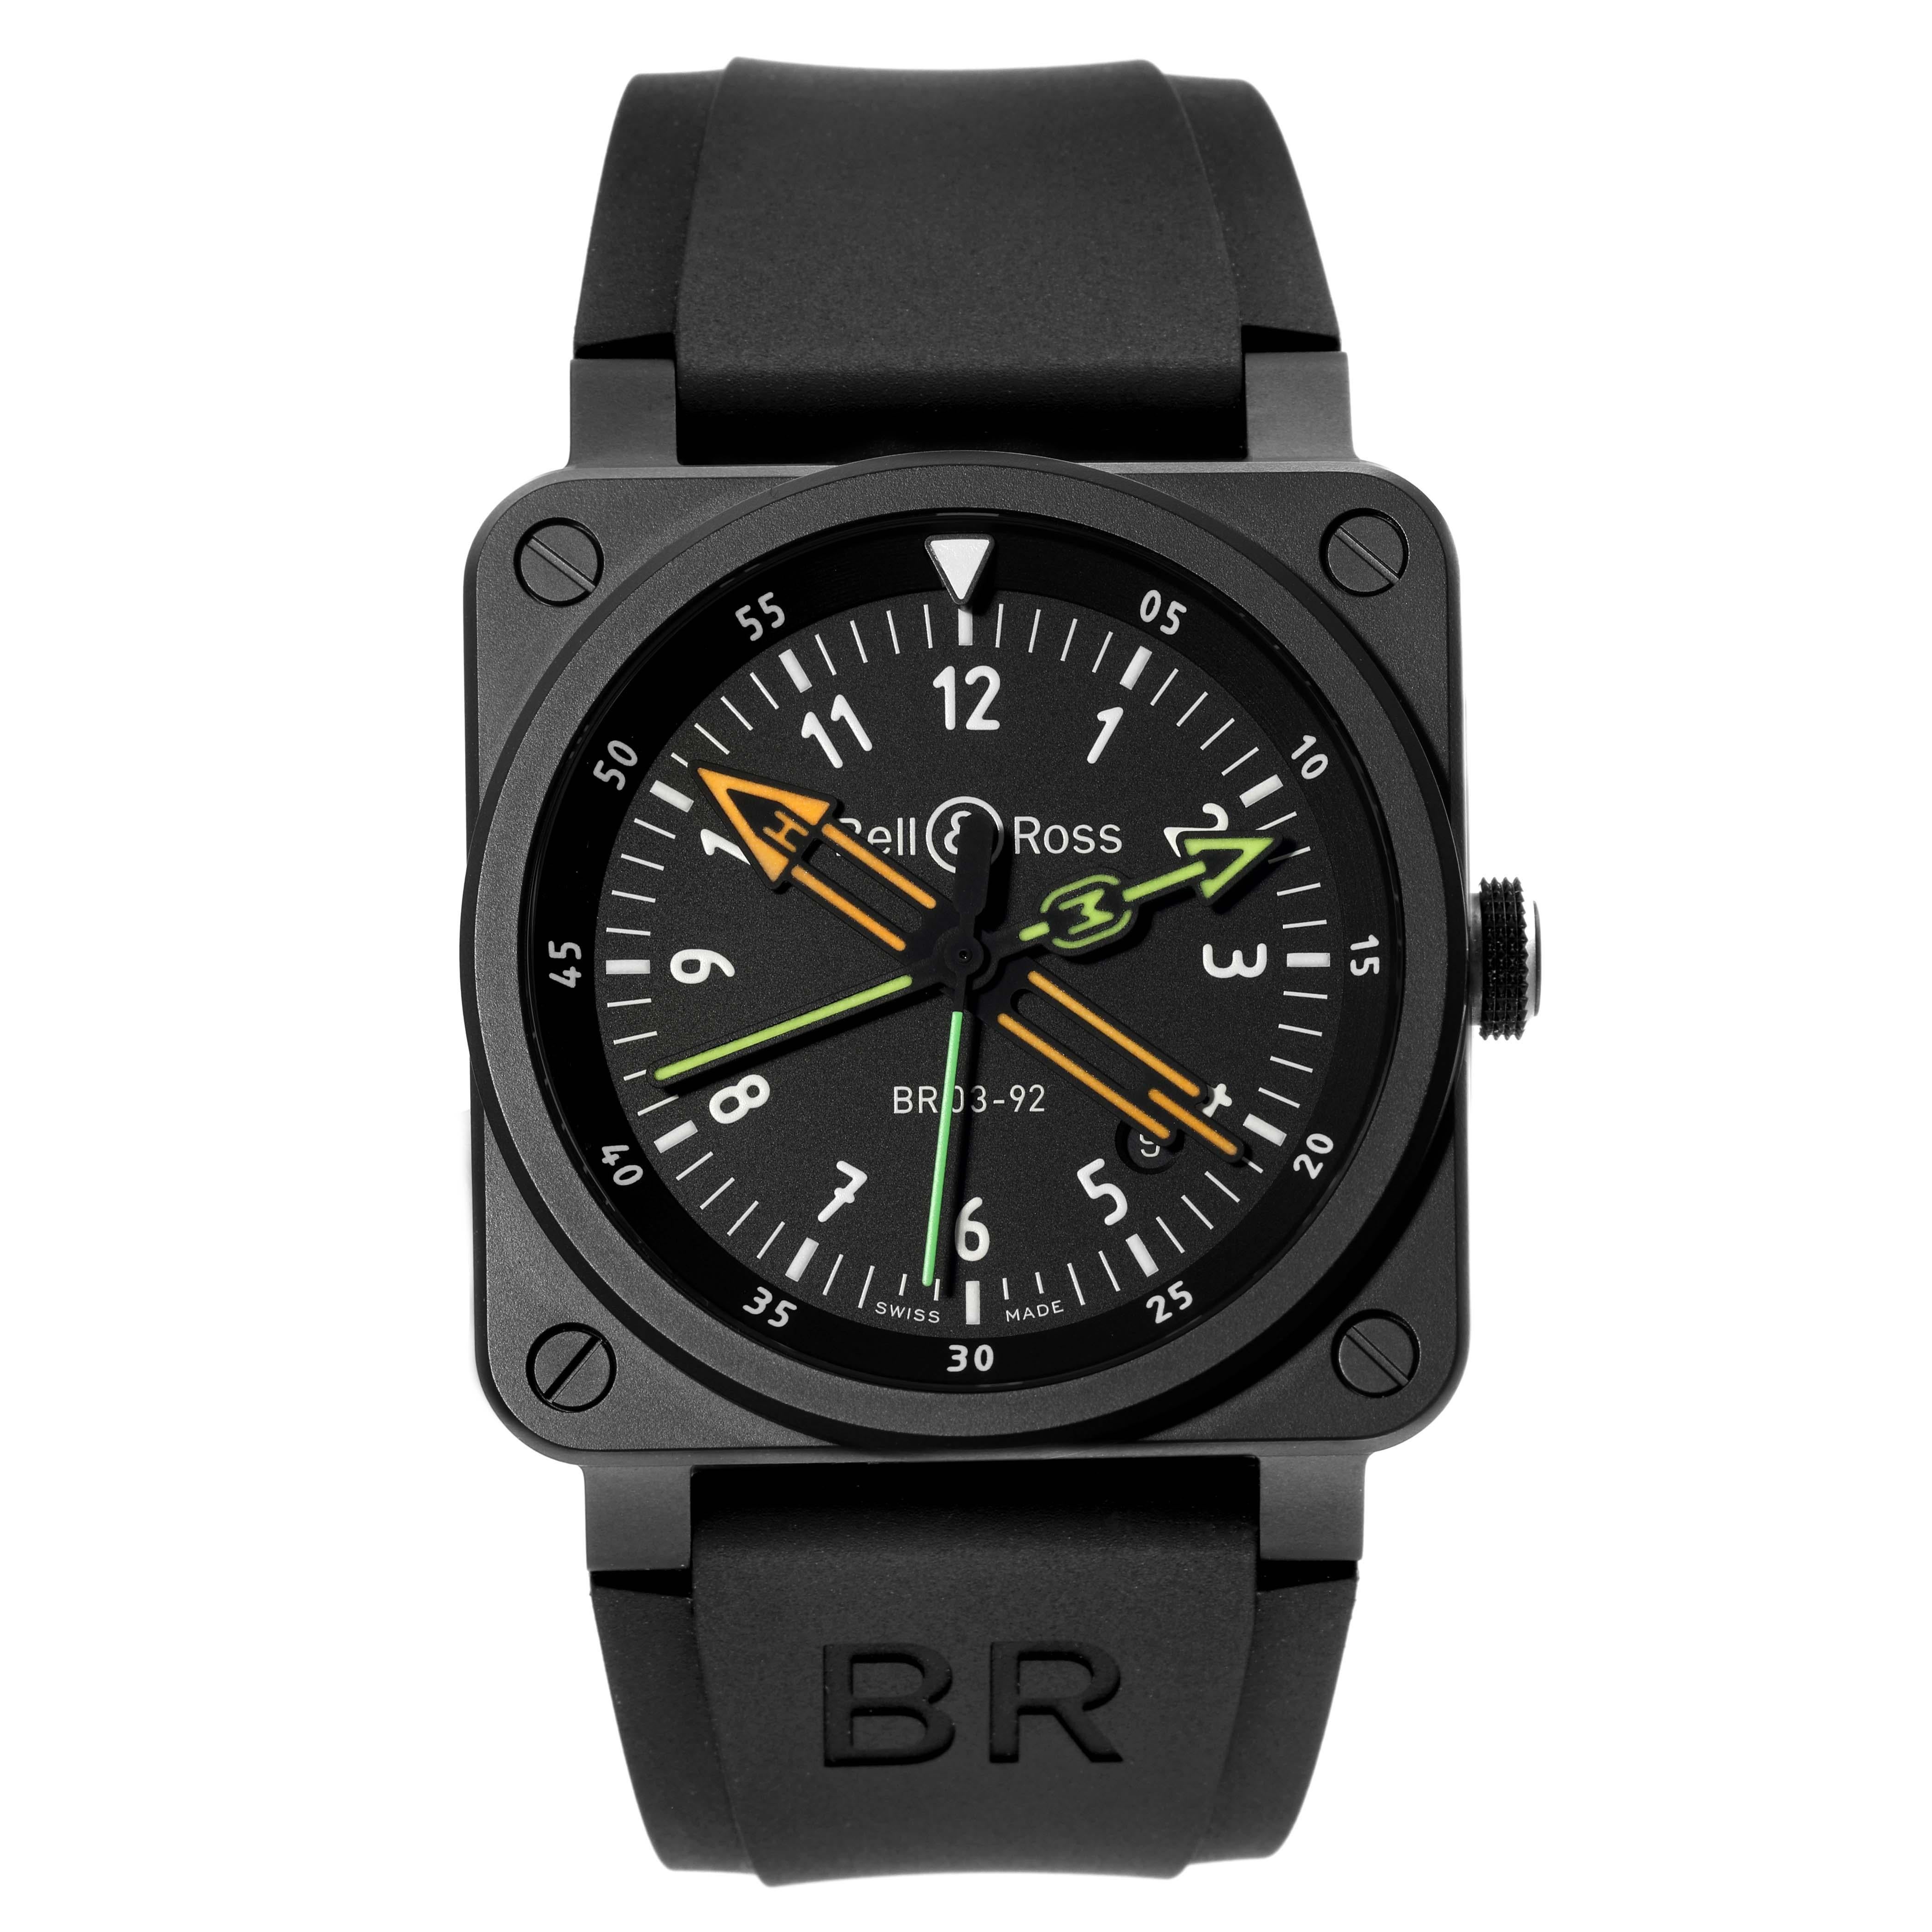 Bell & Ross Radiocompass Limited Edition Black Ceramic Mens Watch BR03-92 Box Card. Automatic self-winding movement. Matte black ceramic square case 42mm x 42mm. Matte black ceramic bezel. Scratch resistant sapphire crystal with anti-reflective